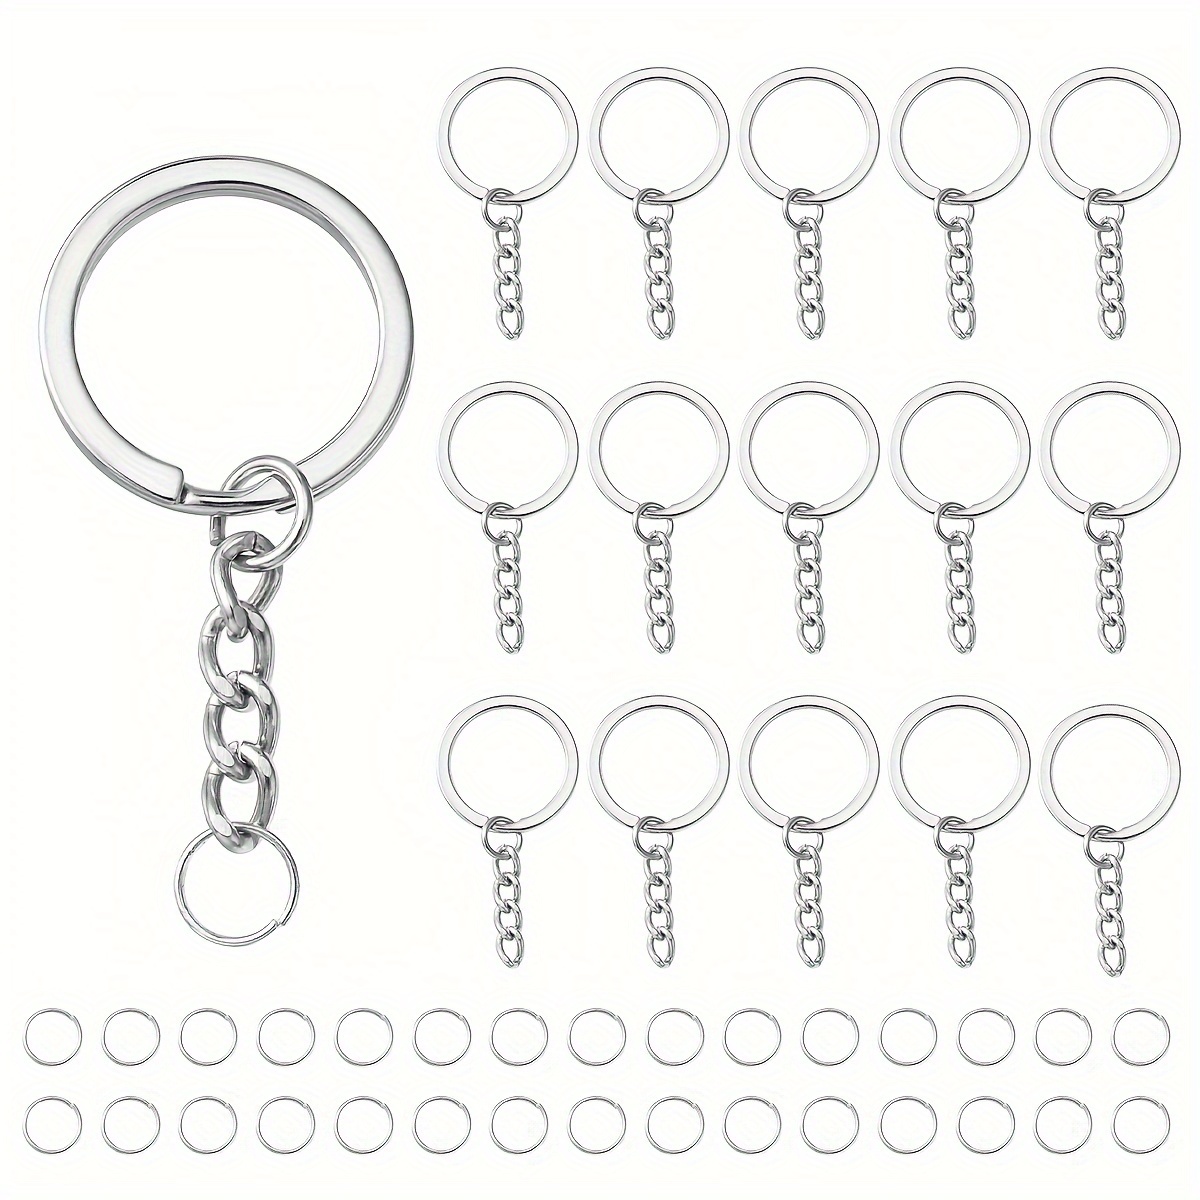 PAXCOO Keychain Making Supplies, 50Pcs Keychains with Chain and 50 Pcs Jump  Rings, Keychain Rings Kit Keychain Findings Bulk for Keychain Making DIY